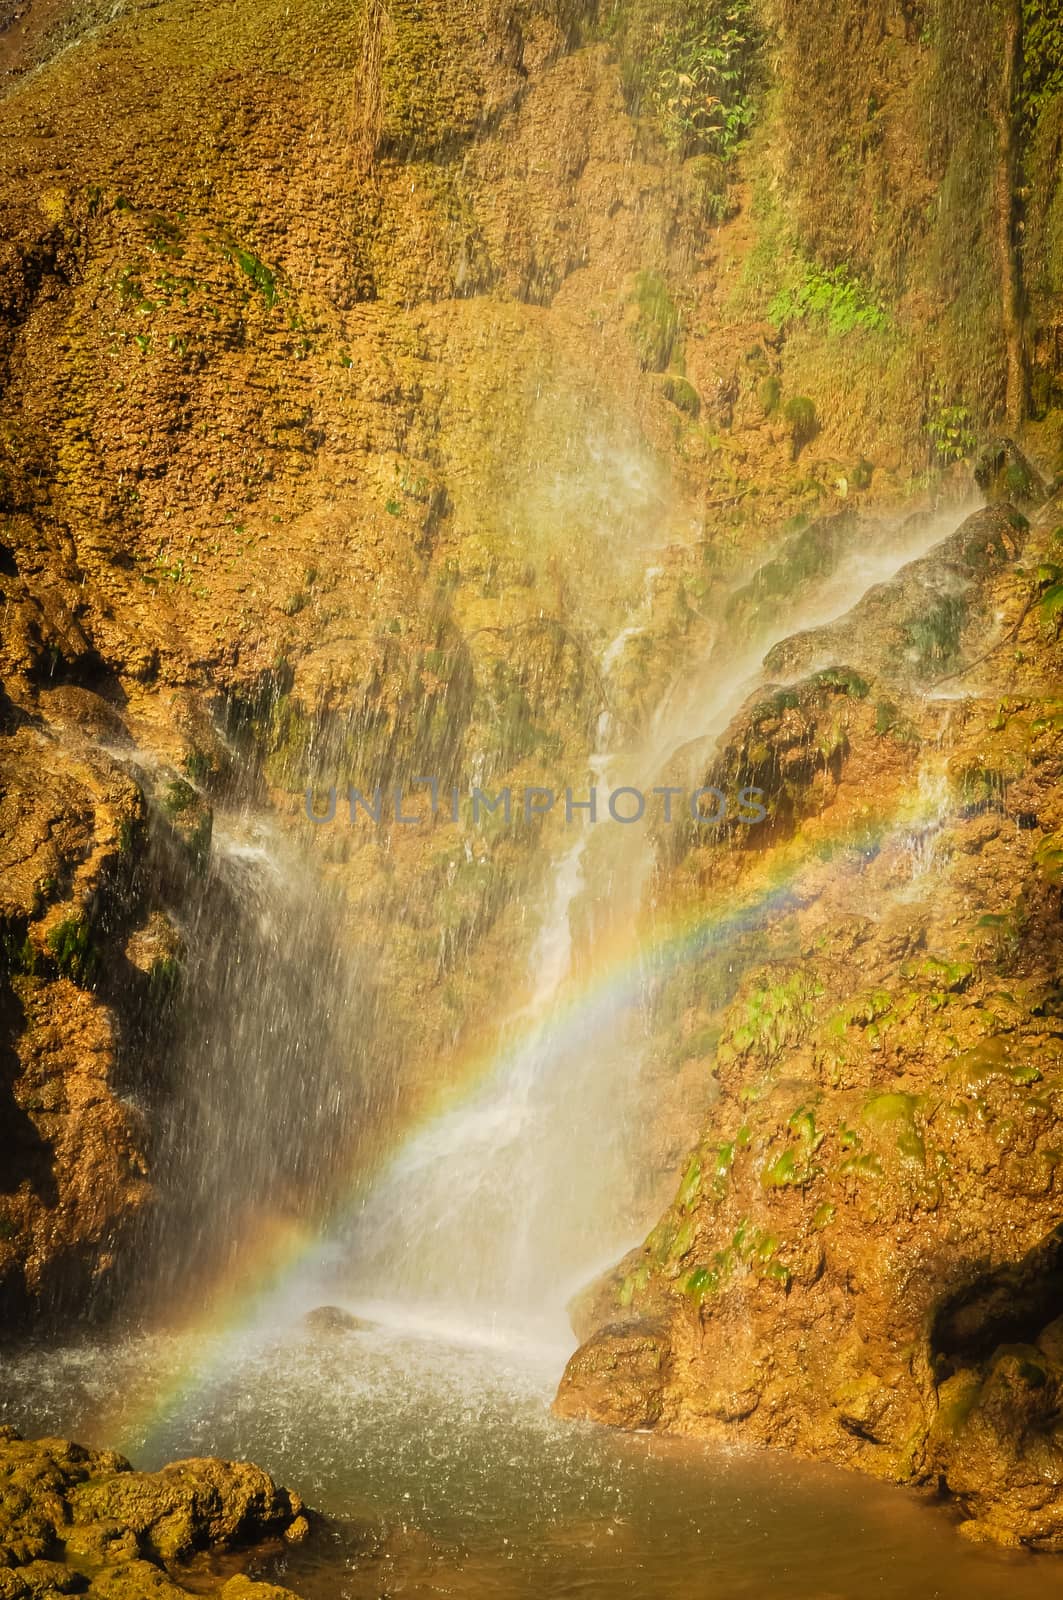 Refreshing waterfall pouring into an emerald pond and rainbow over Dai Yem (Pink Blouse) by trongnguyen